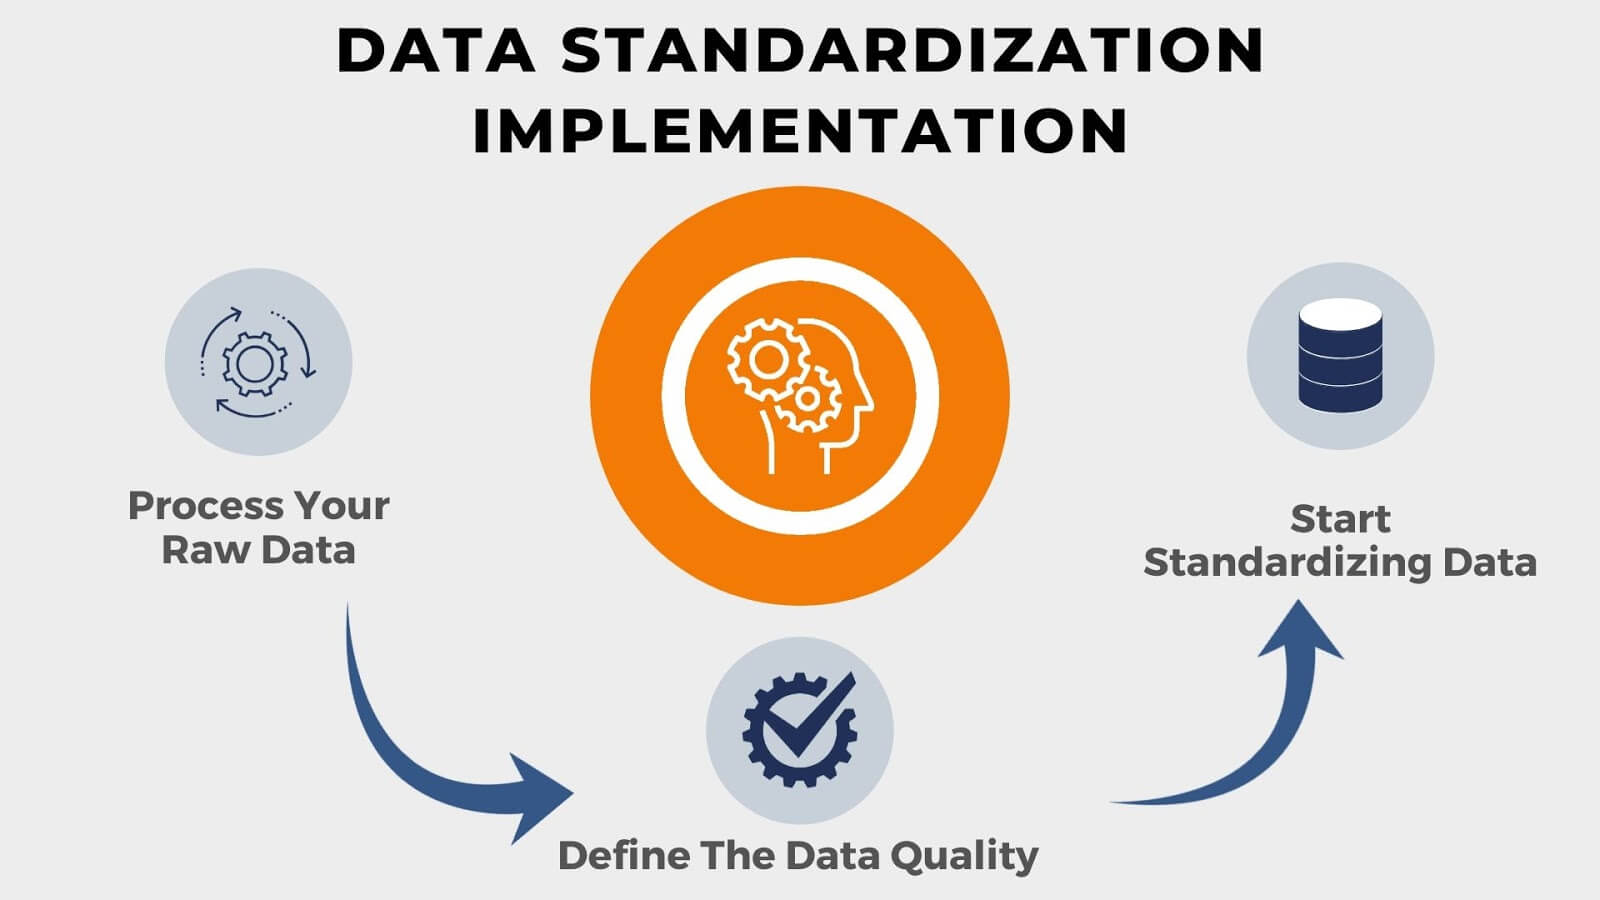 How To Implement Data Standardization?